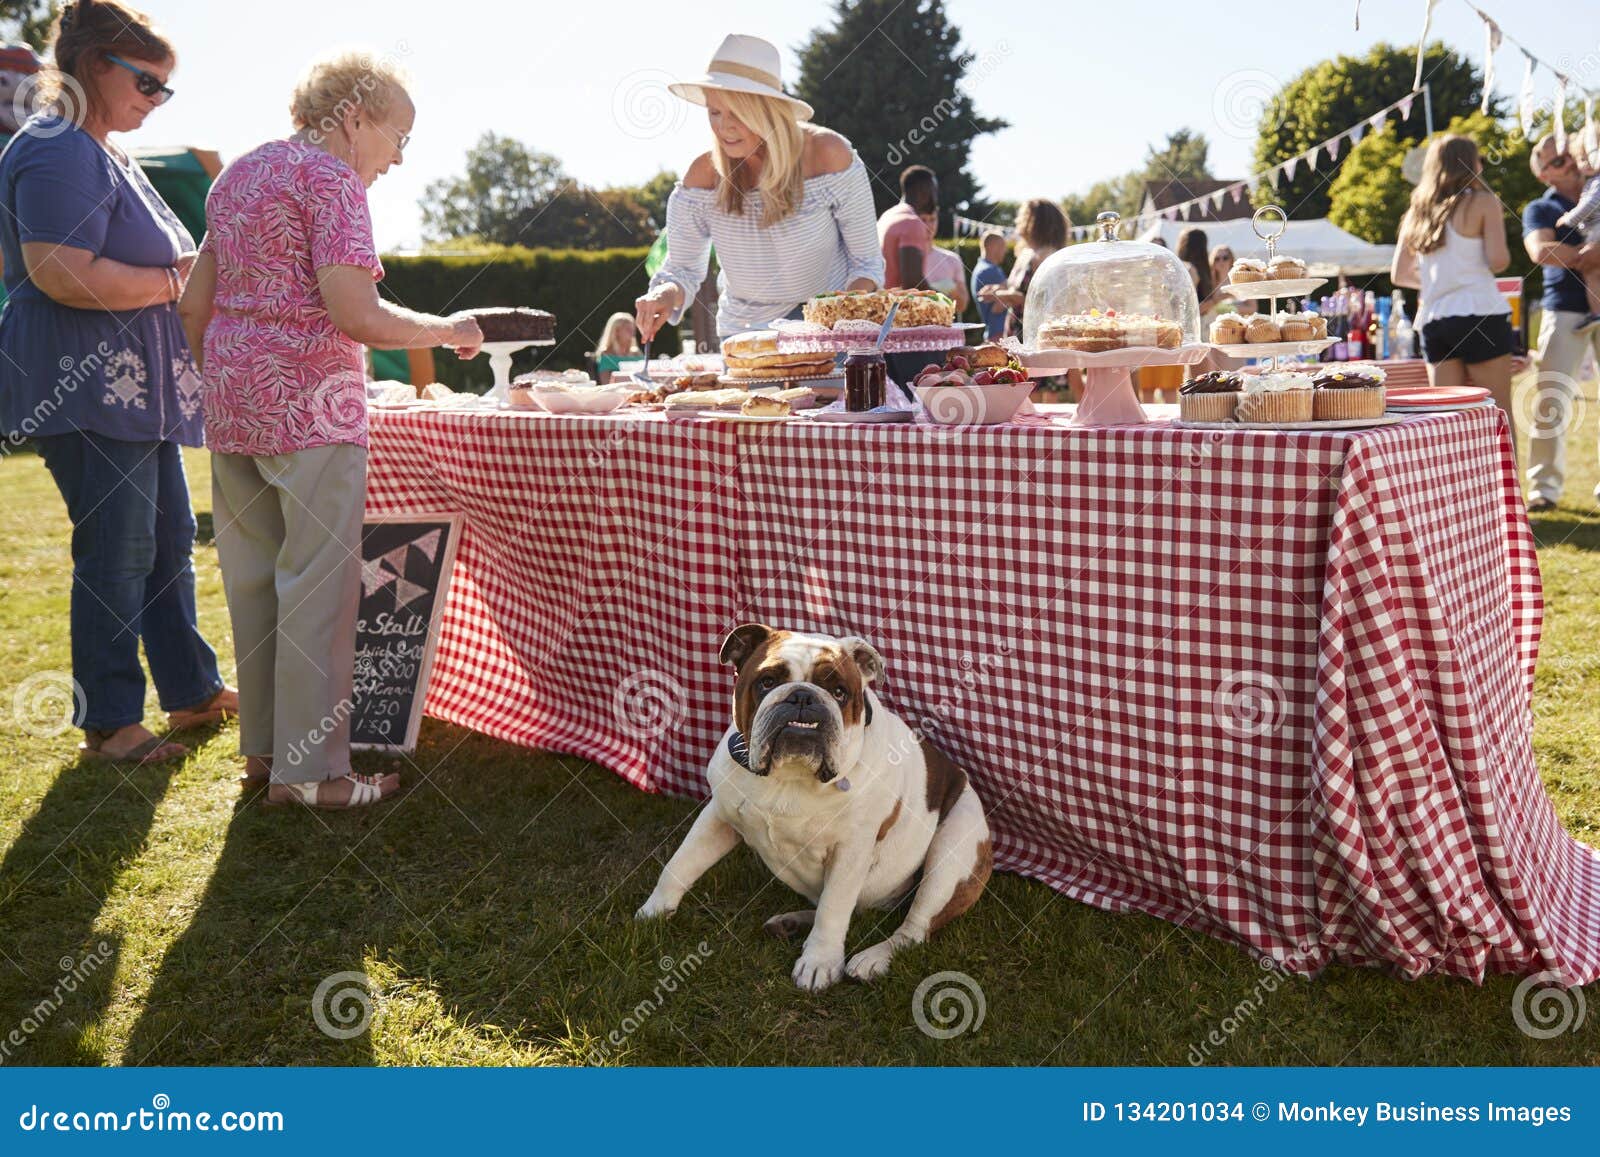 english bulldog sitting by cake stall at busy summer garden fete